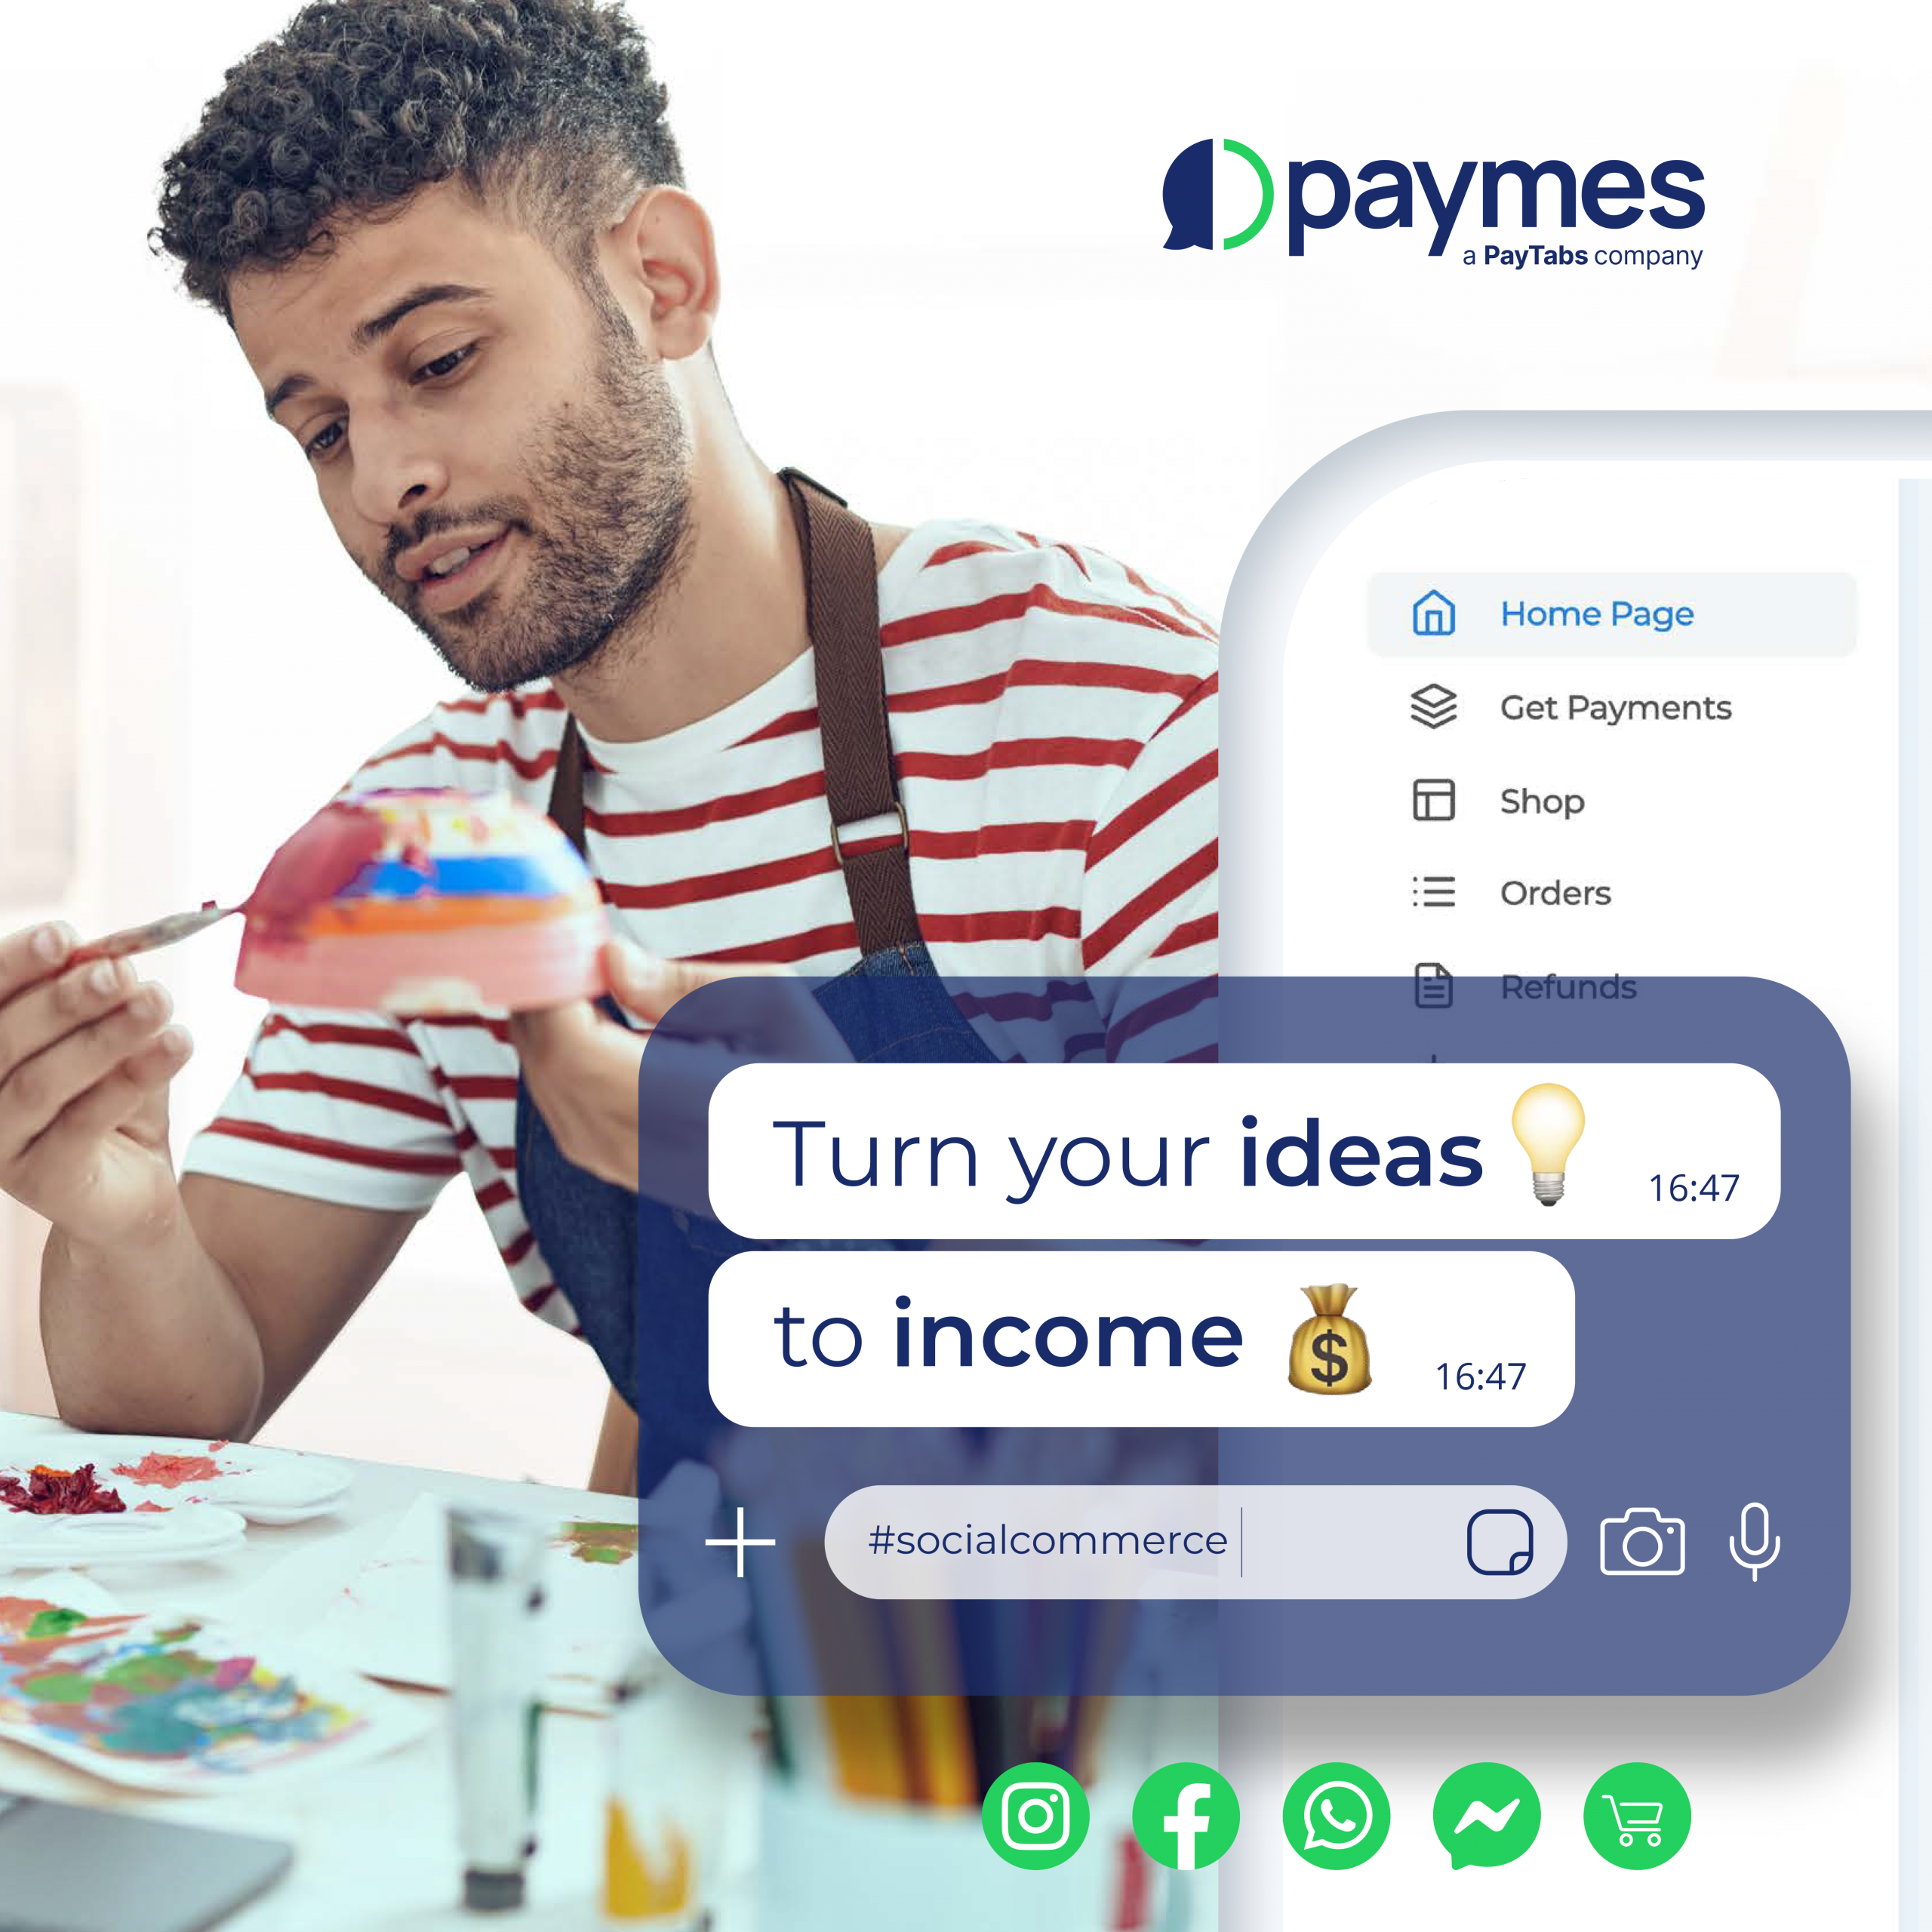 Paymes is a solution for small businesses and freelancers